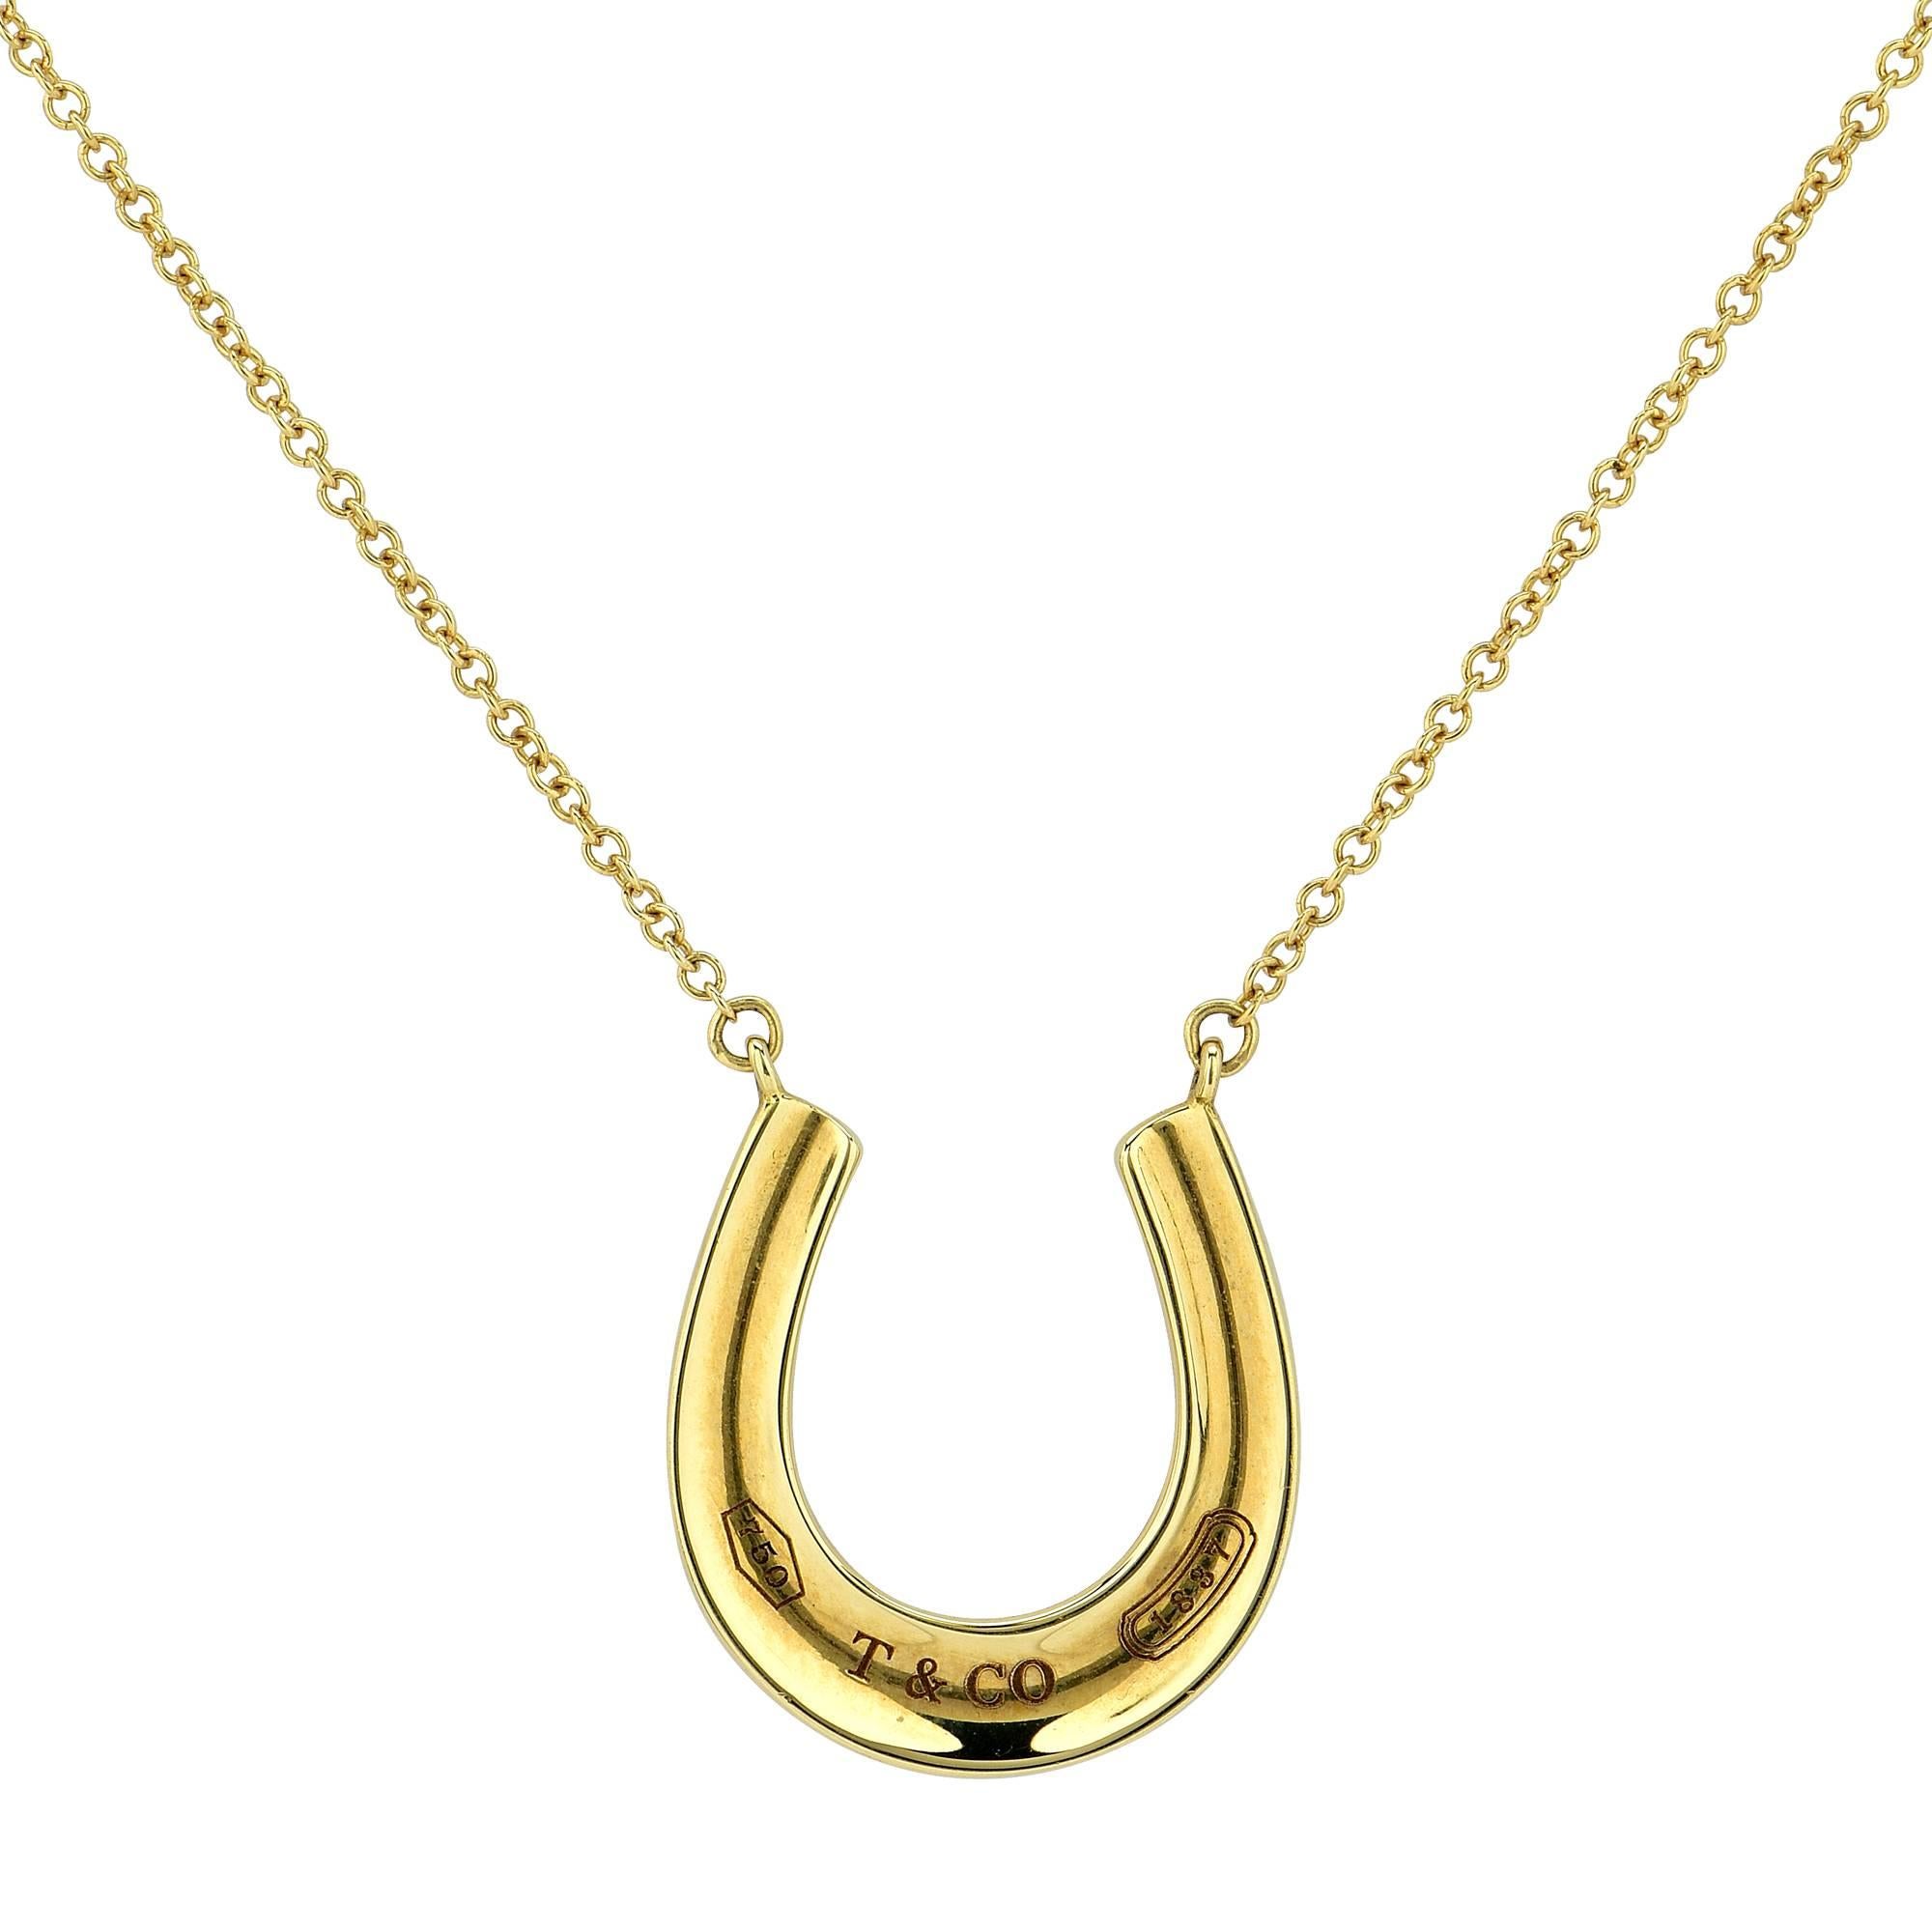 Tiffany & Co. 1837 horseshoe pendant and necklace crafted in 18k yellow gold.

The pendant measures 0.61 inch in width by 0.61 inch in height and is strung from an 18 inch chain.
It is stamped and/or tested as 18k gold.
This pendant weighs 3.74